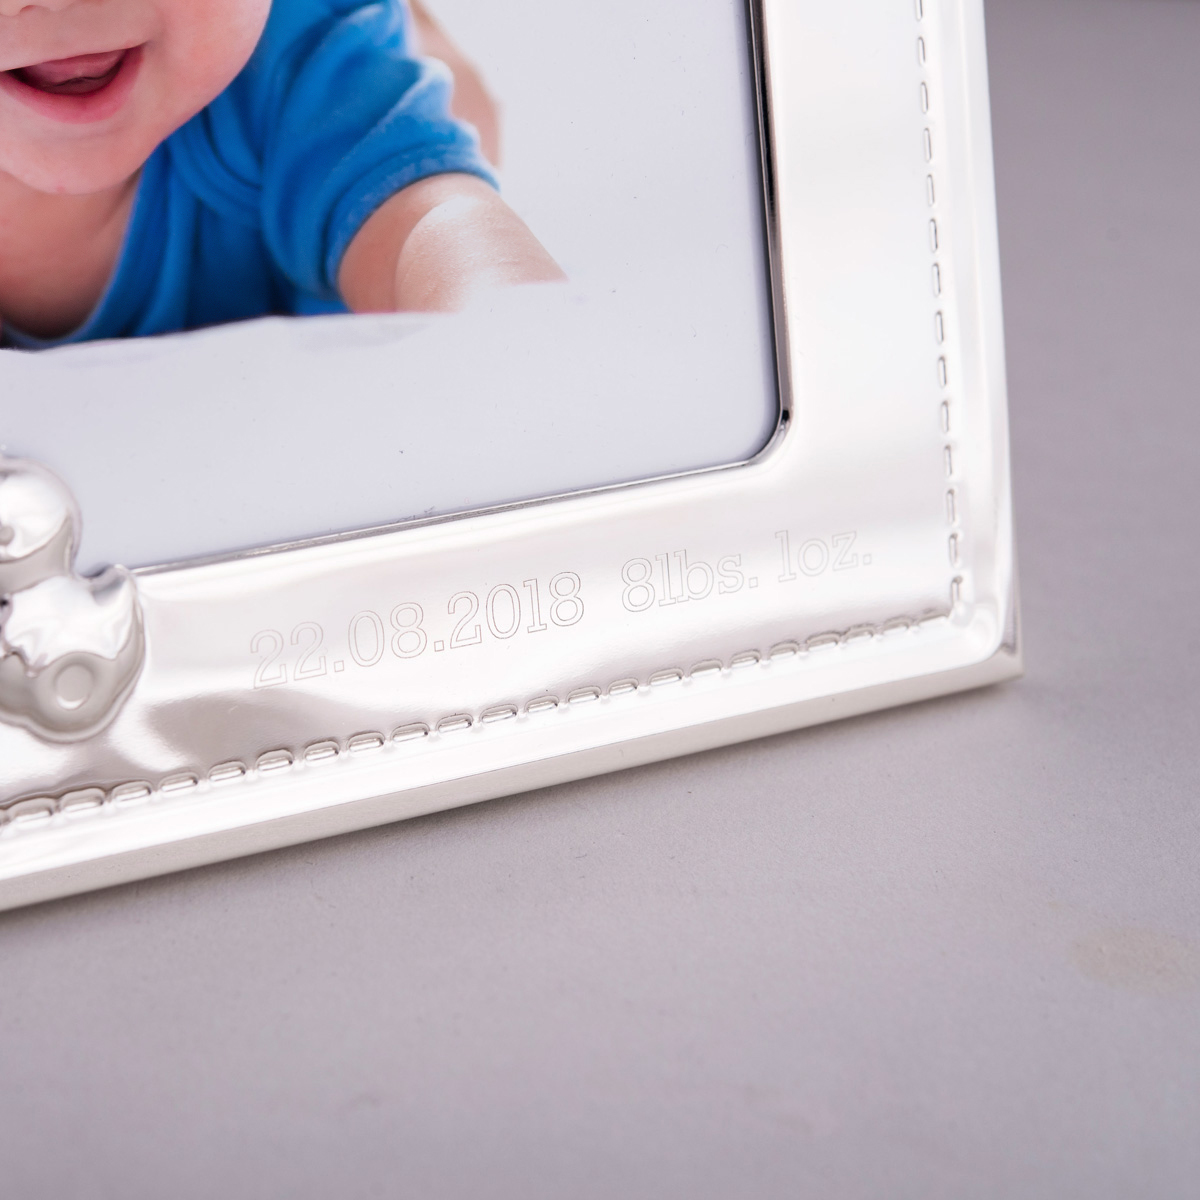 Personalised Silver Photo Frame - Teddy